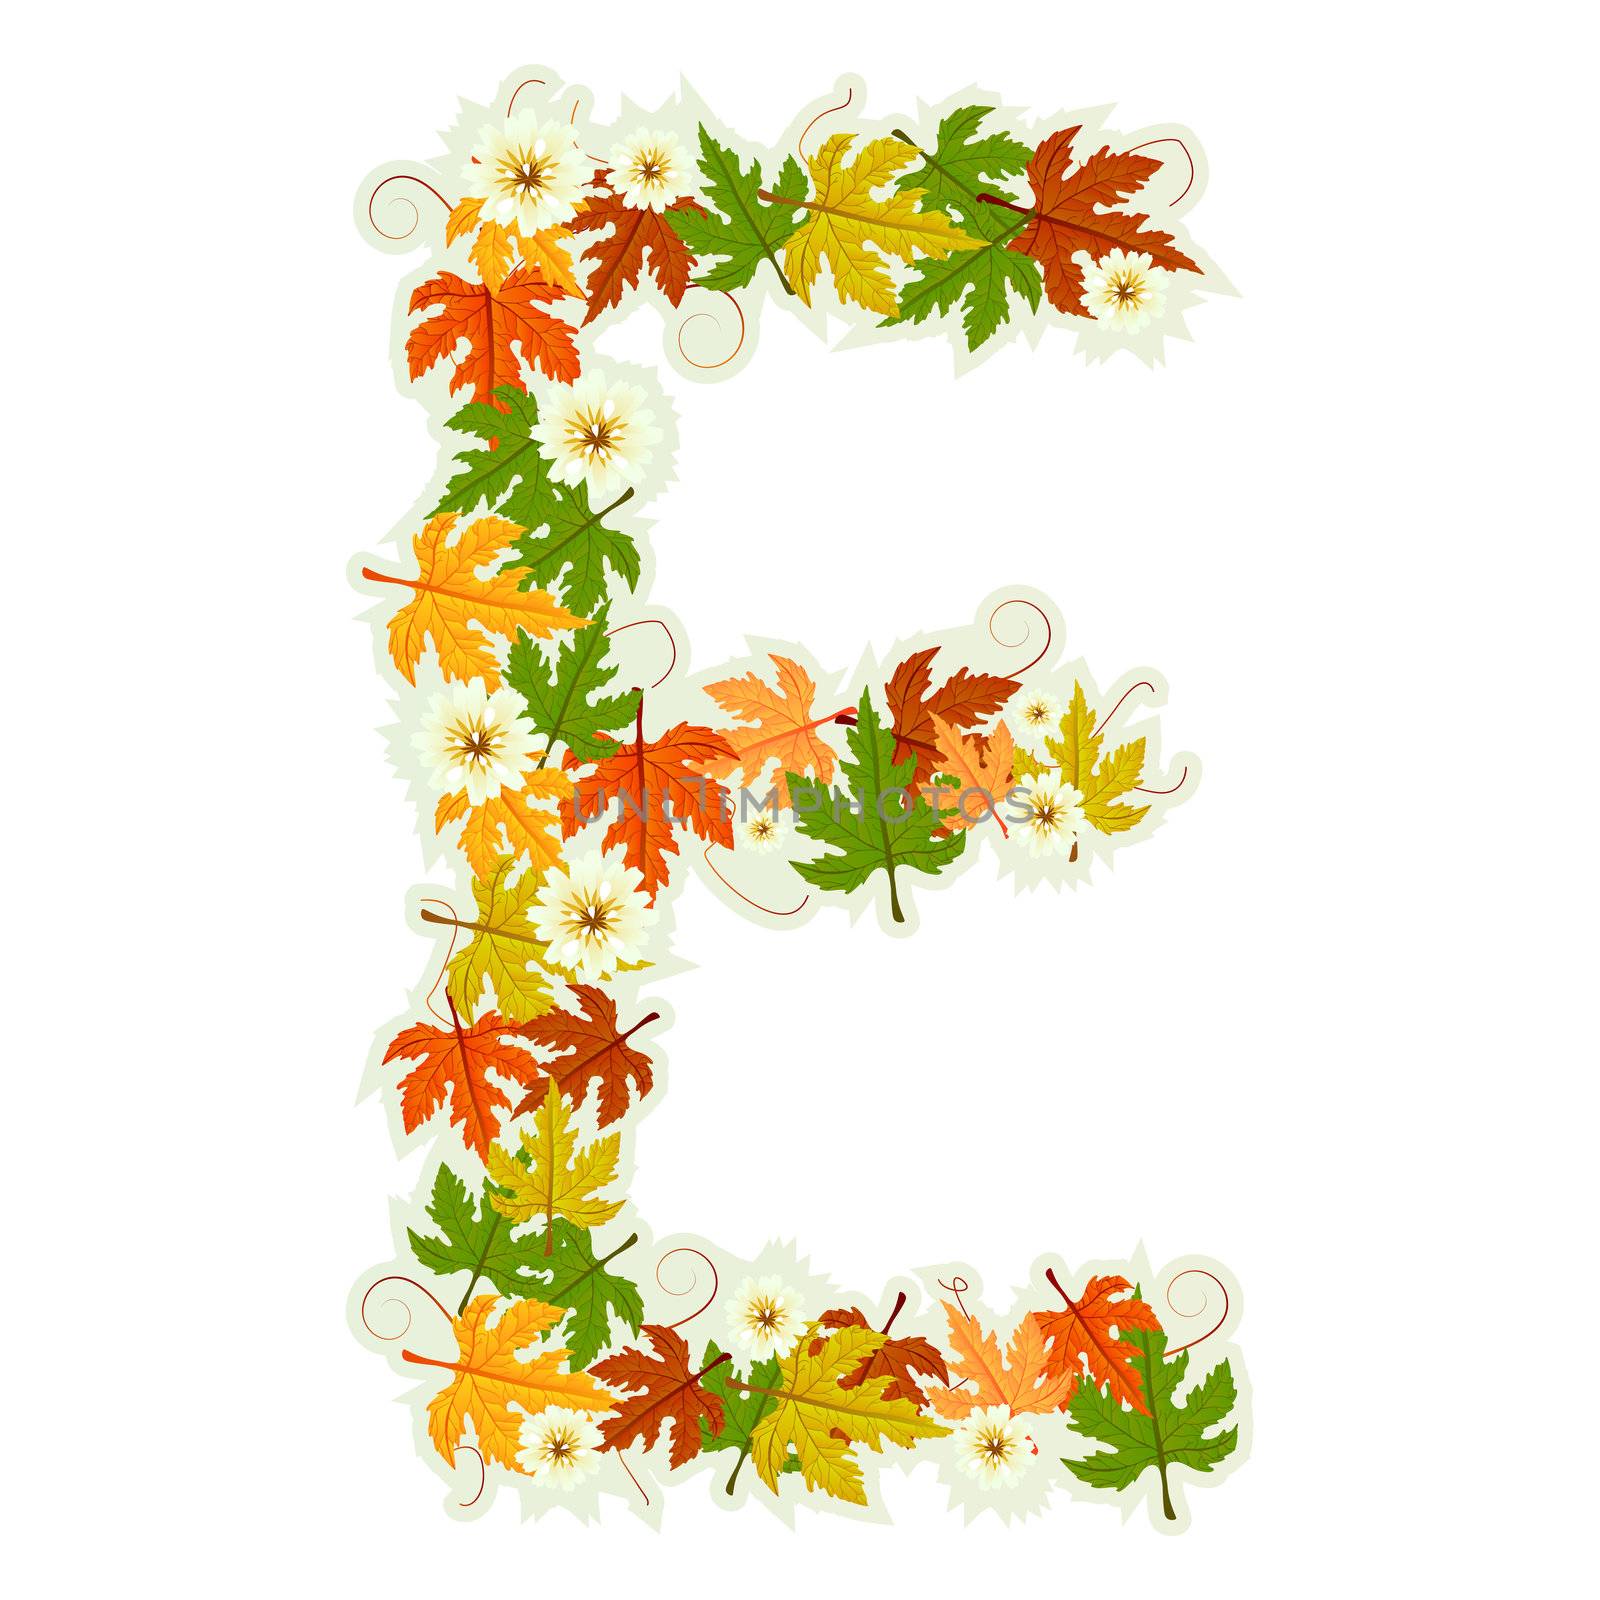 Pattern floral letter E by Lirch